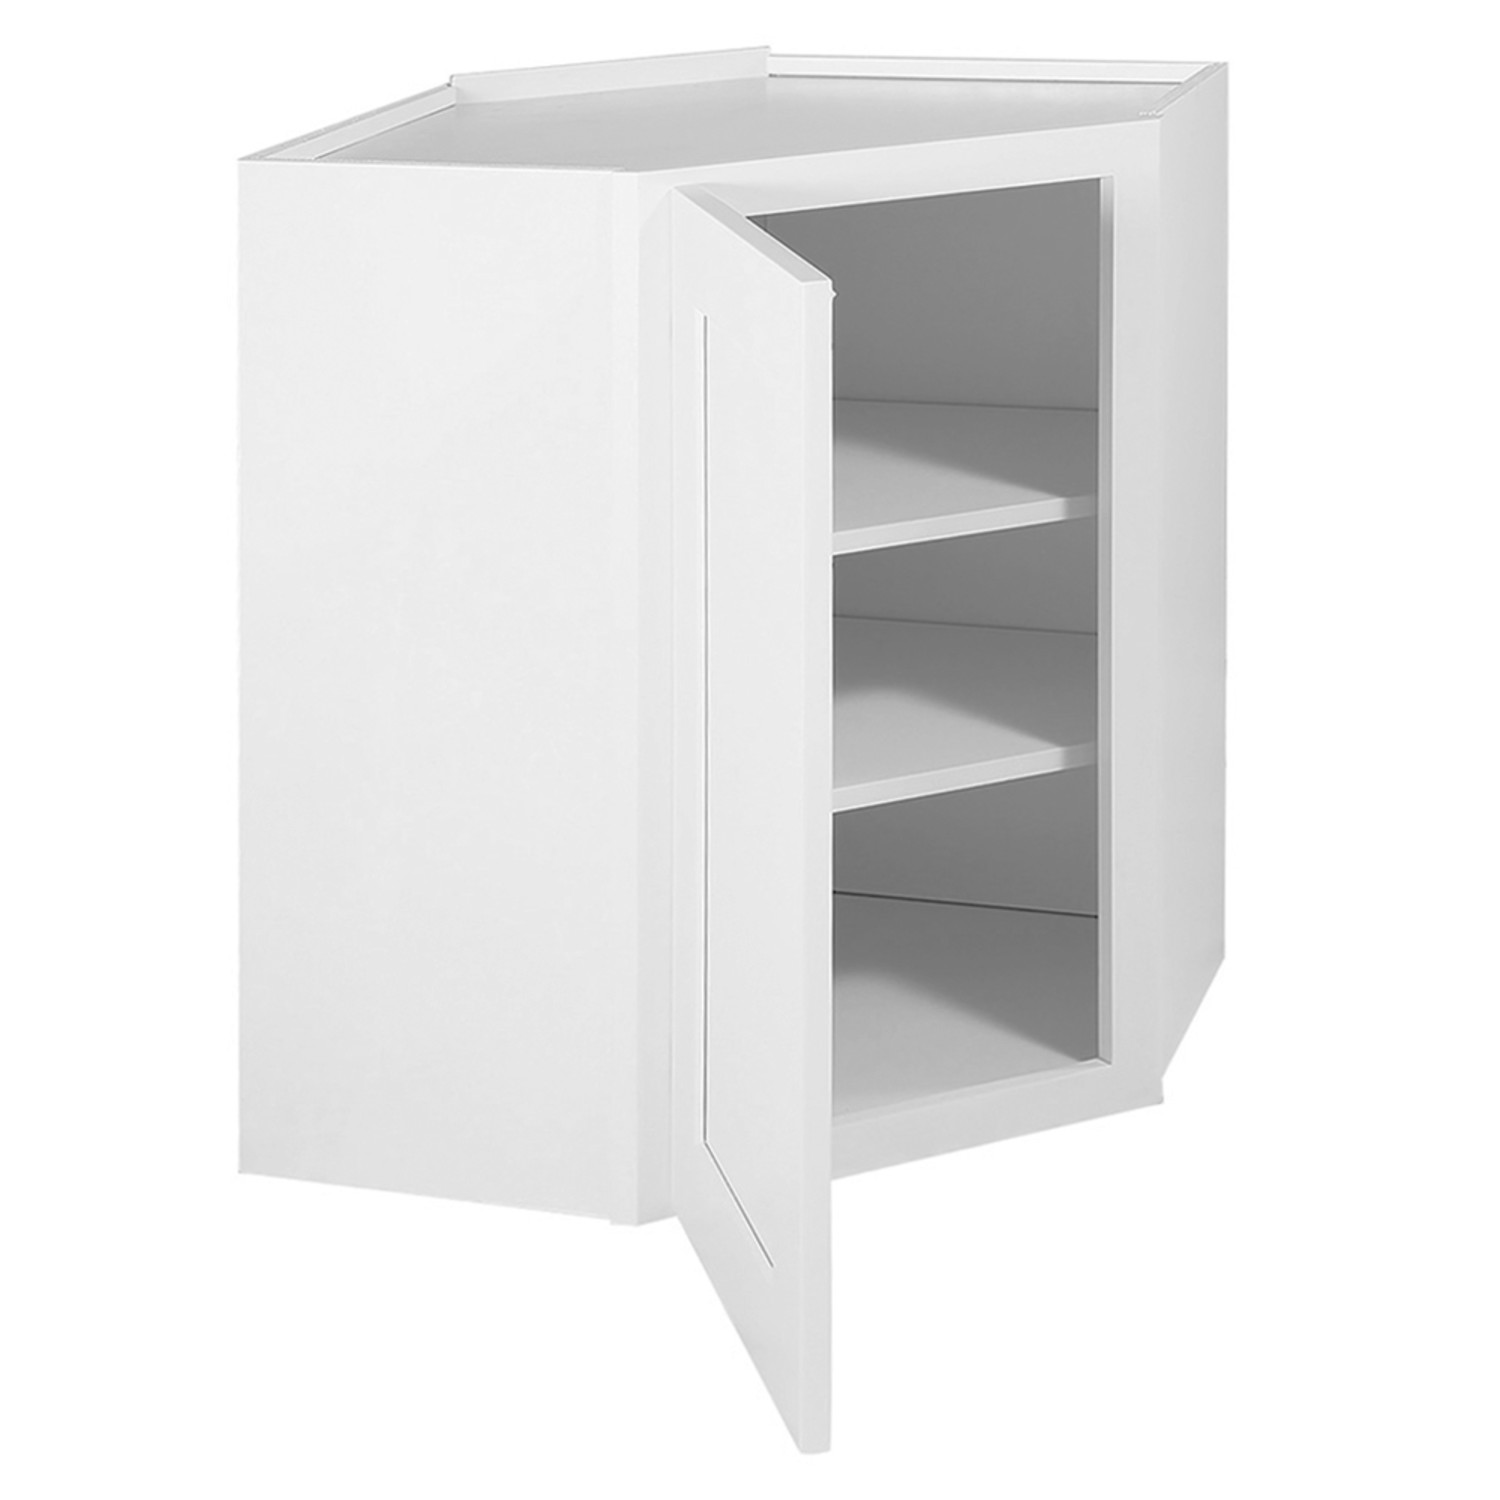 Fully Assembled Corner Cabinet In White 24 Inch By 30 12 ǀ Kitchen Today S Design House